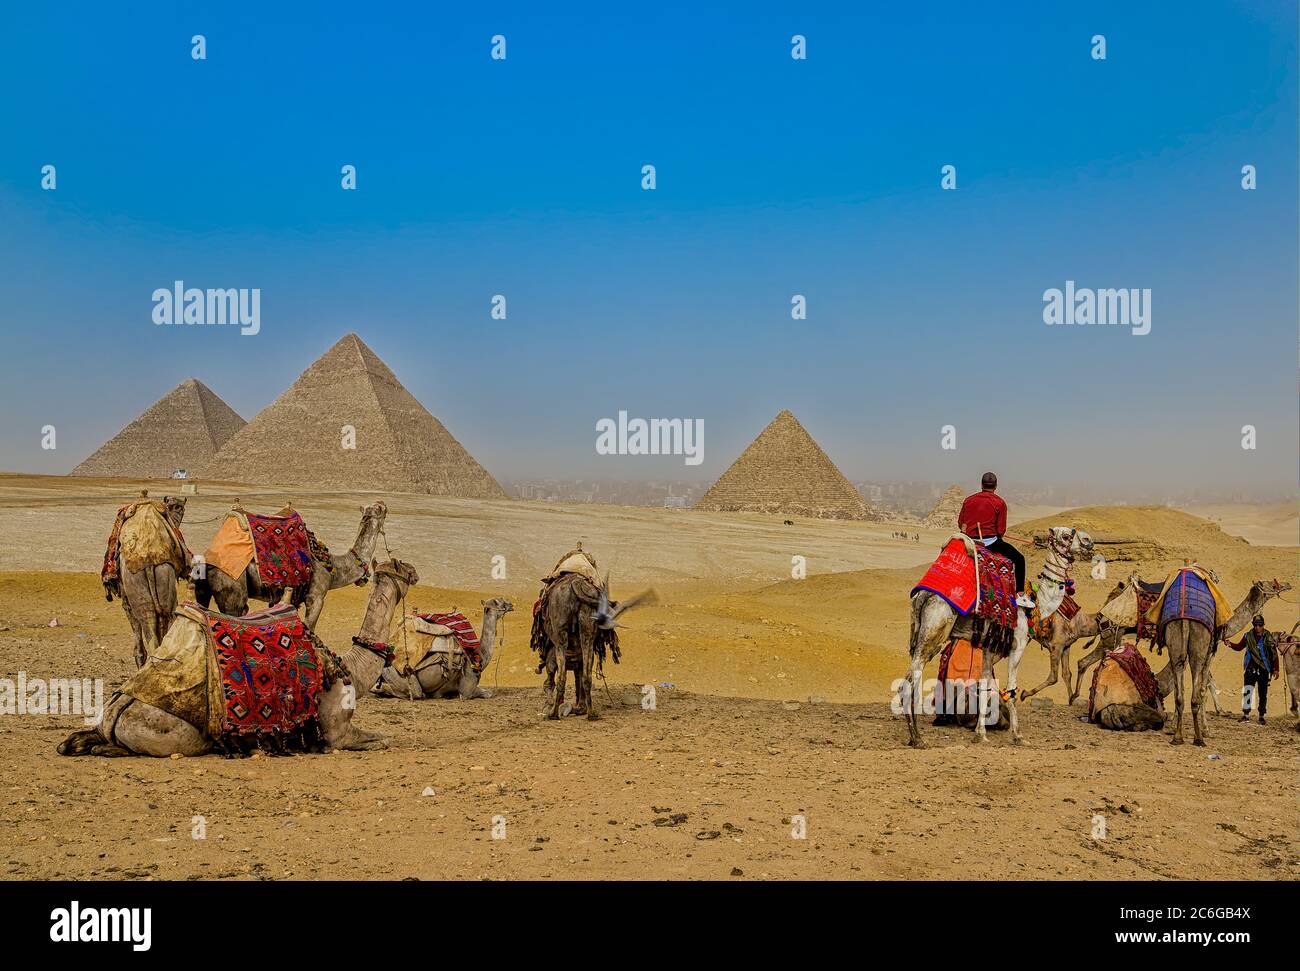 Camel caravan in the desert in front of the Great Pyramid of Giza, the Pyramid of Khafre, Pyramid of Menkaure on the Giza Plateau Stock Photo